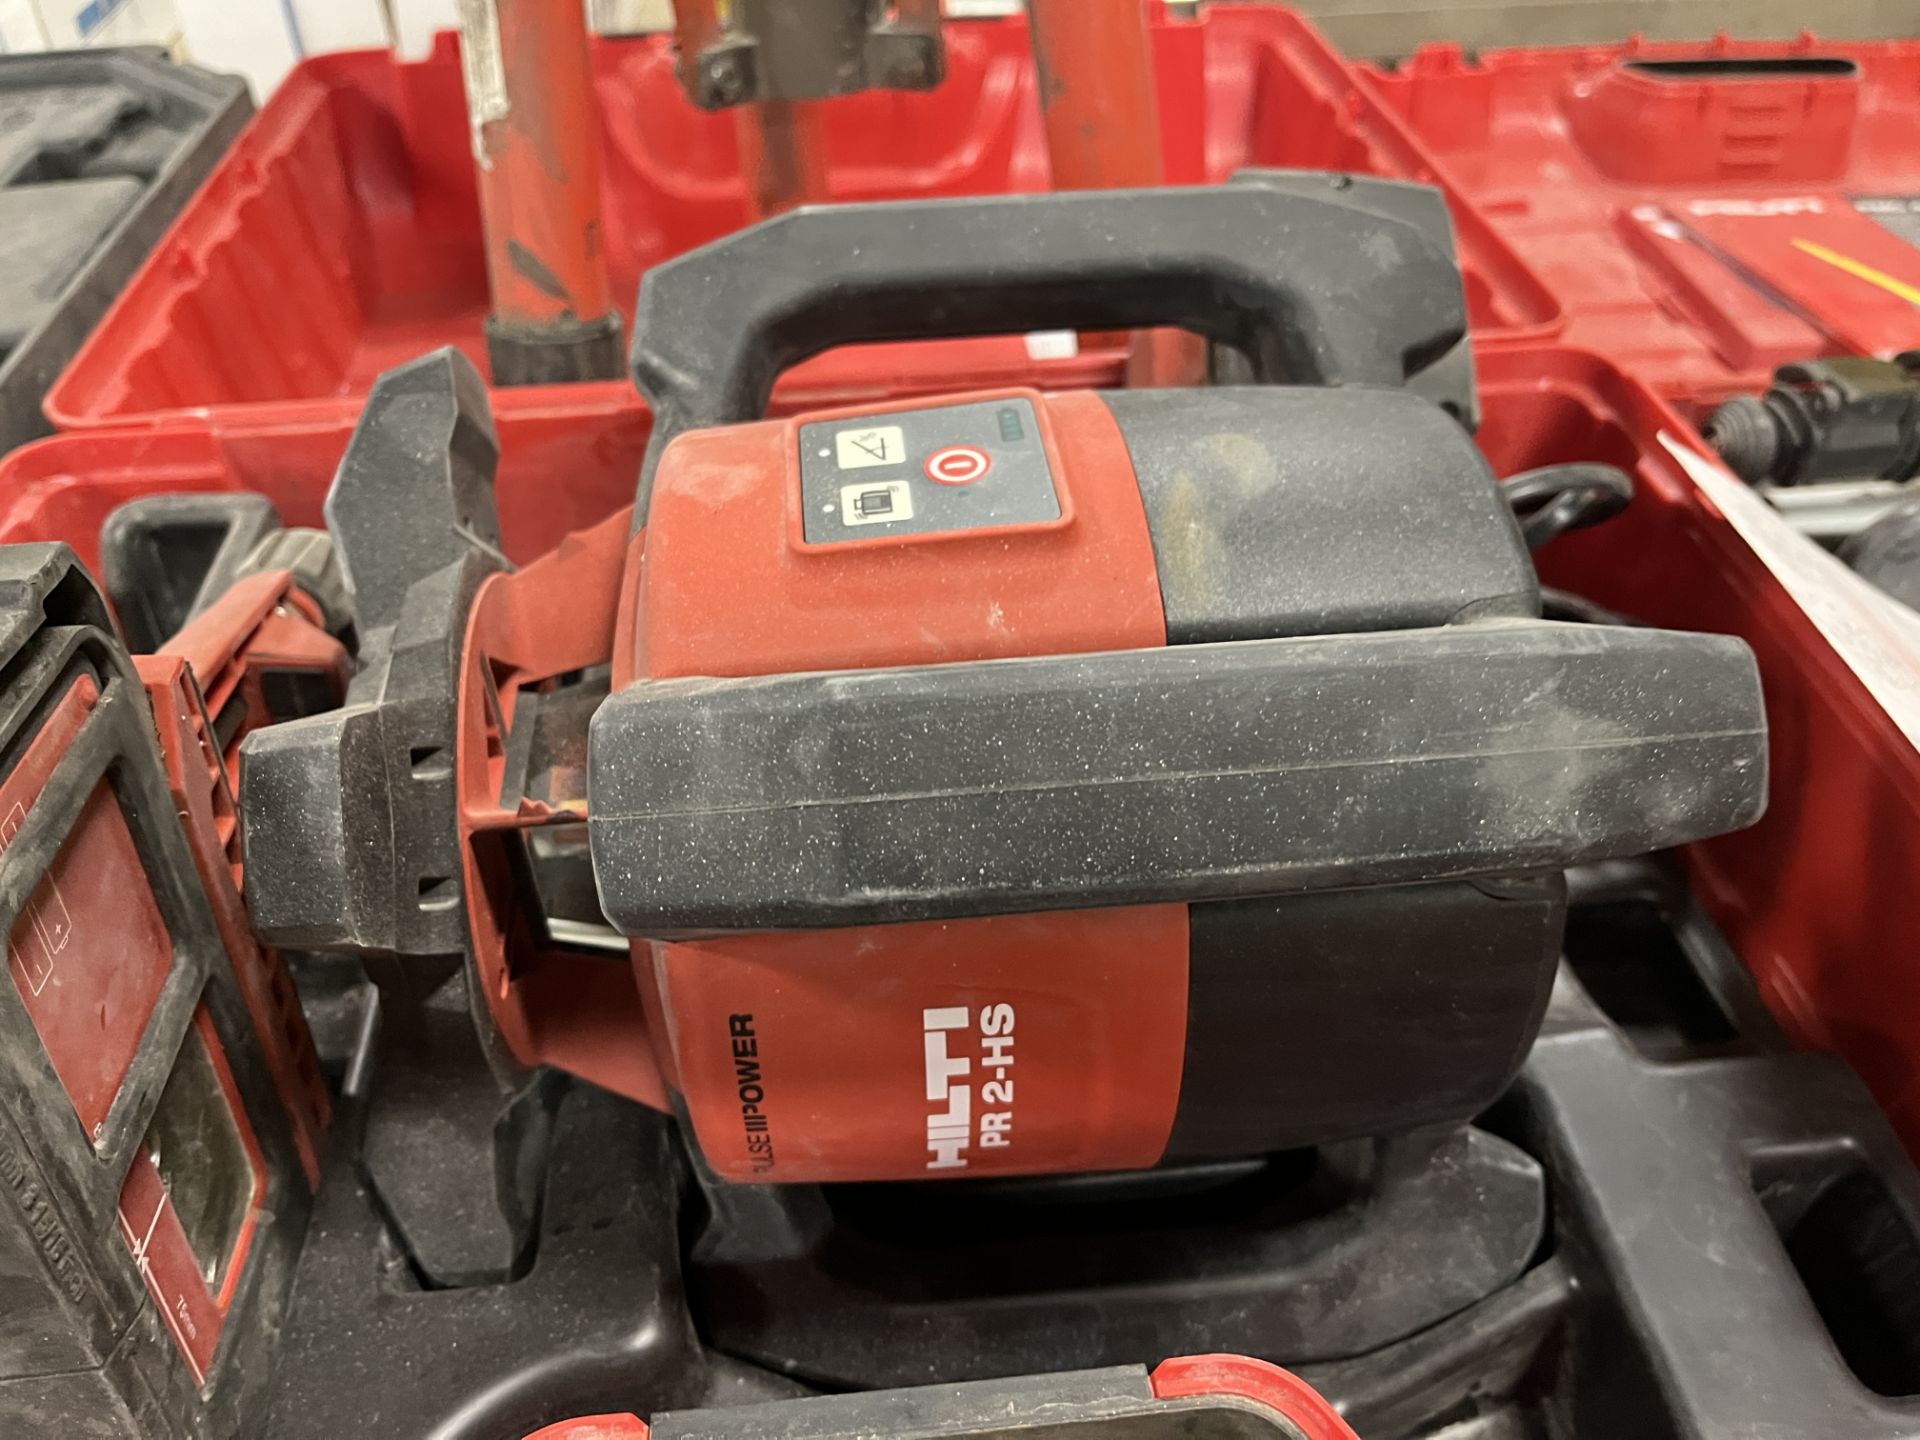 HILTI PR 2-H5 LASER ROTATION TRANSIT W/ HILTI PRA 83 CONTROLLER, BATTERY, CHARGER, STAND, CASE - Image 4 of 4